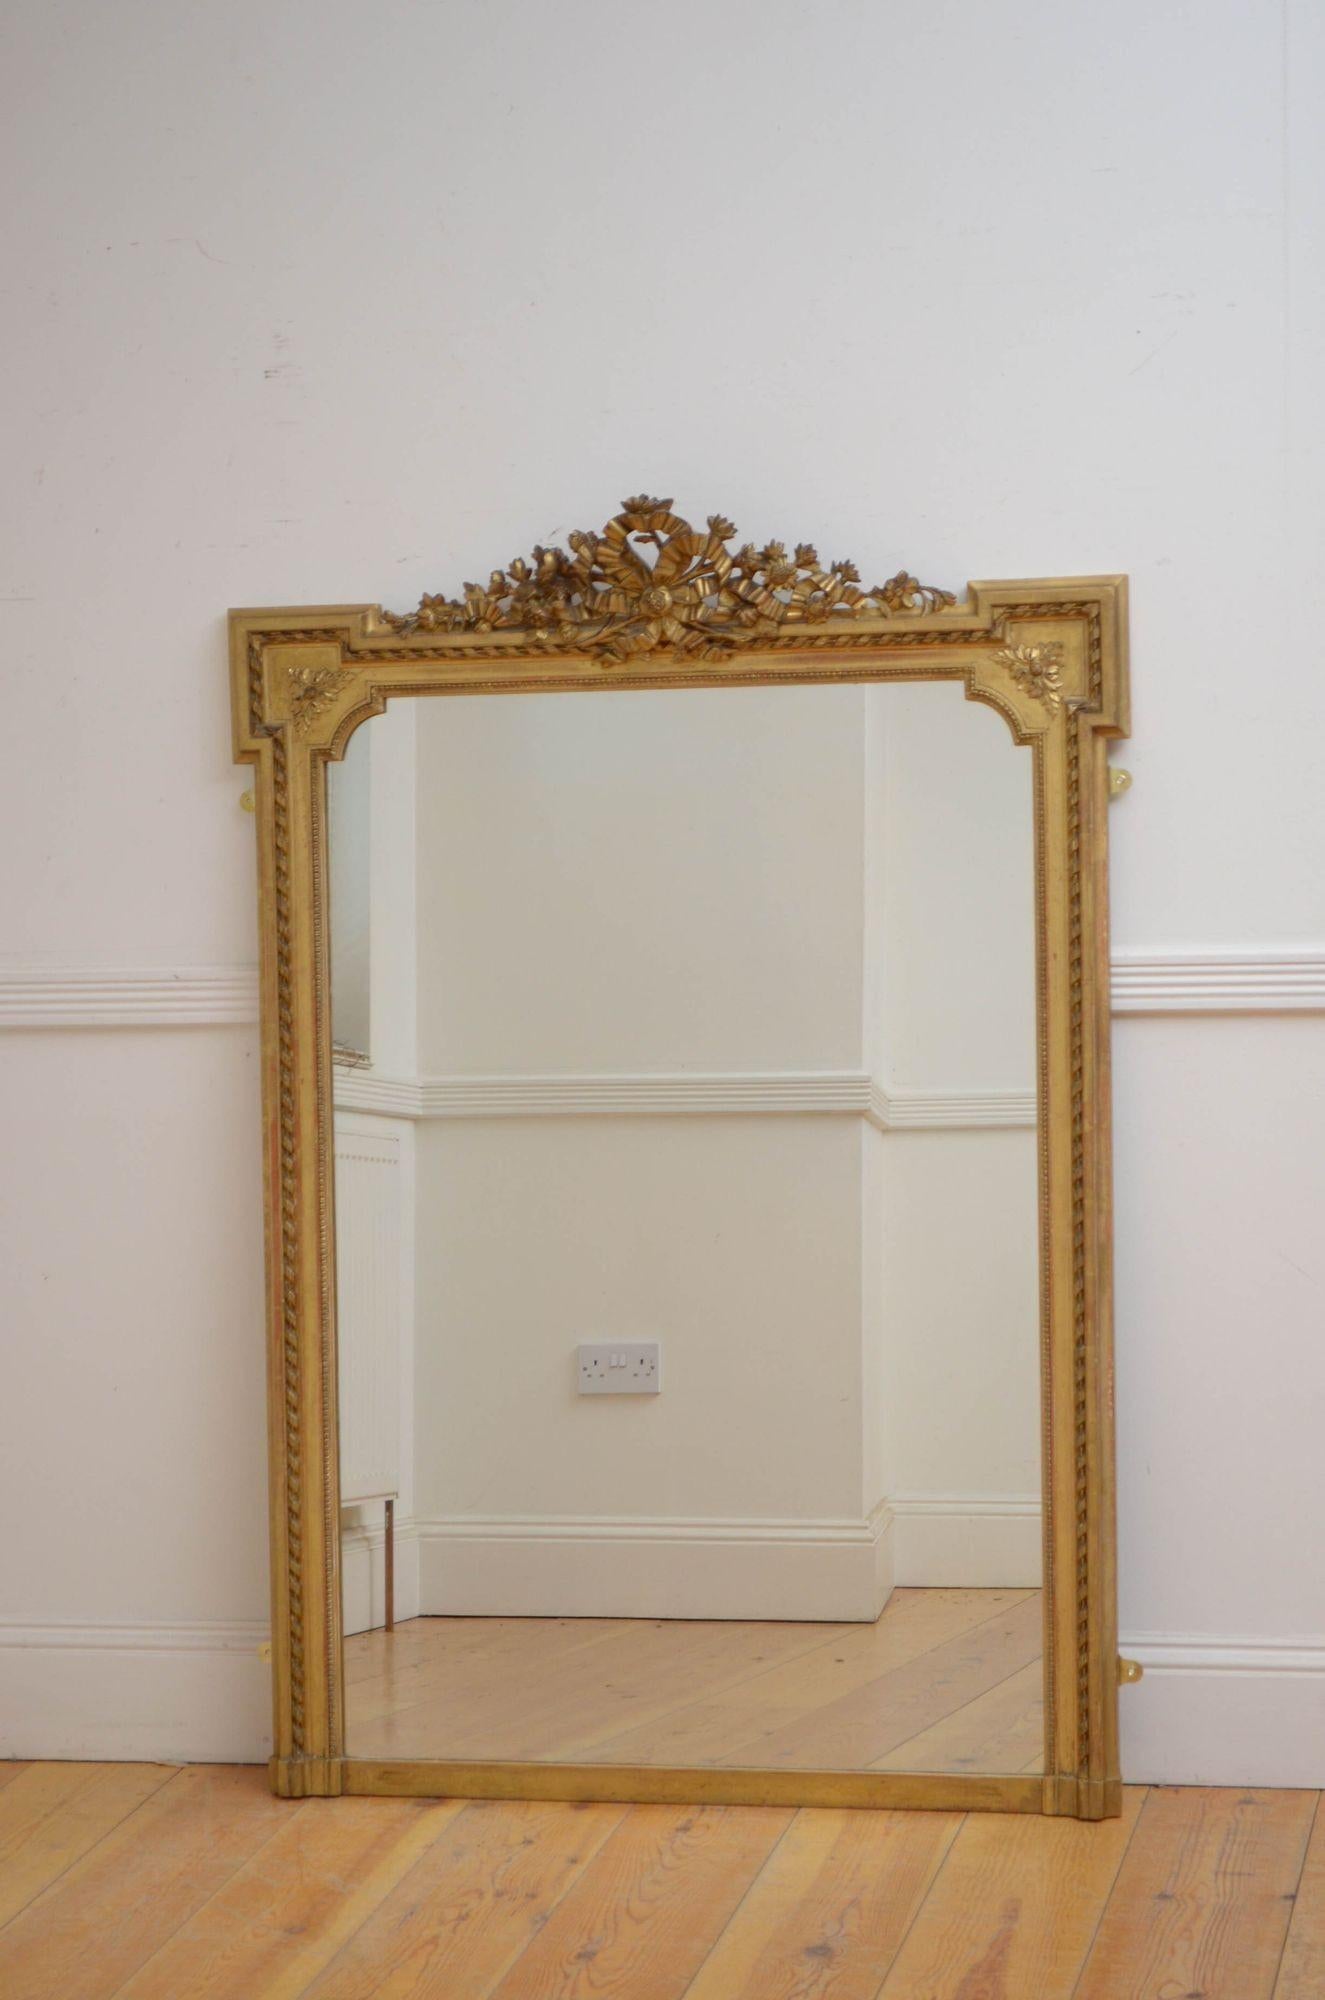 Sn5390 fine 19th century French gilded wall mirror, having original glass with some imperfections in moulded, carved and gilded frame with foliage centre crest decorated with a bow. This antique mirror retains its original glass, original gilt and